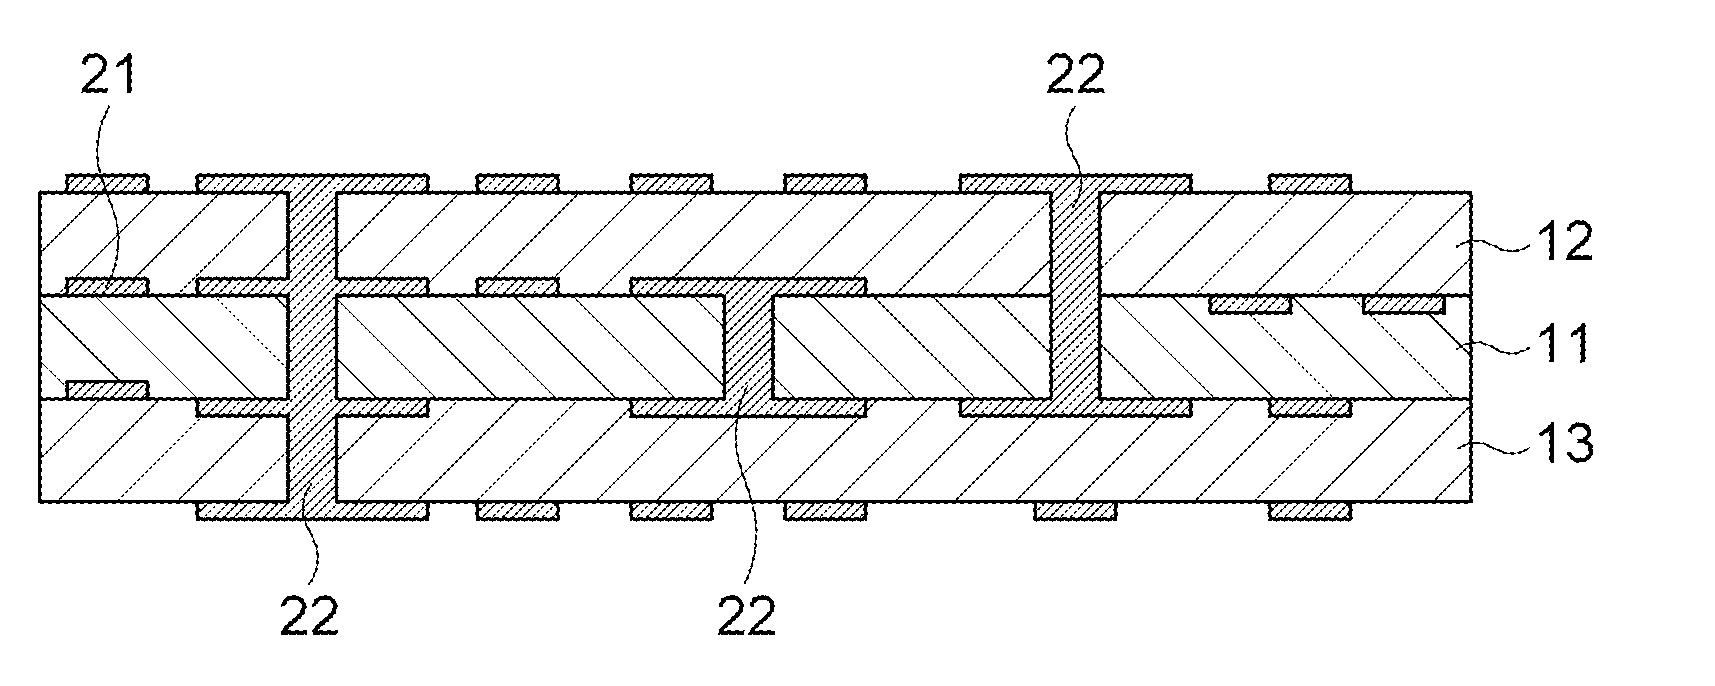 Insulating resin composition for printed circuit board and printed circuit board including the same